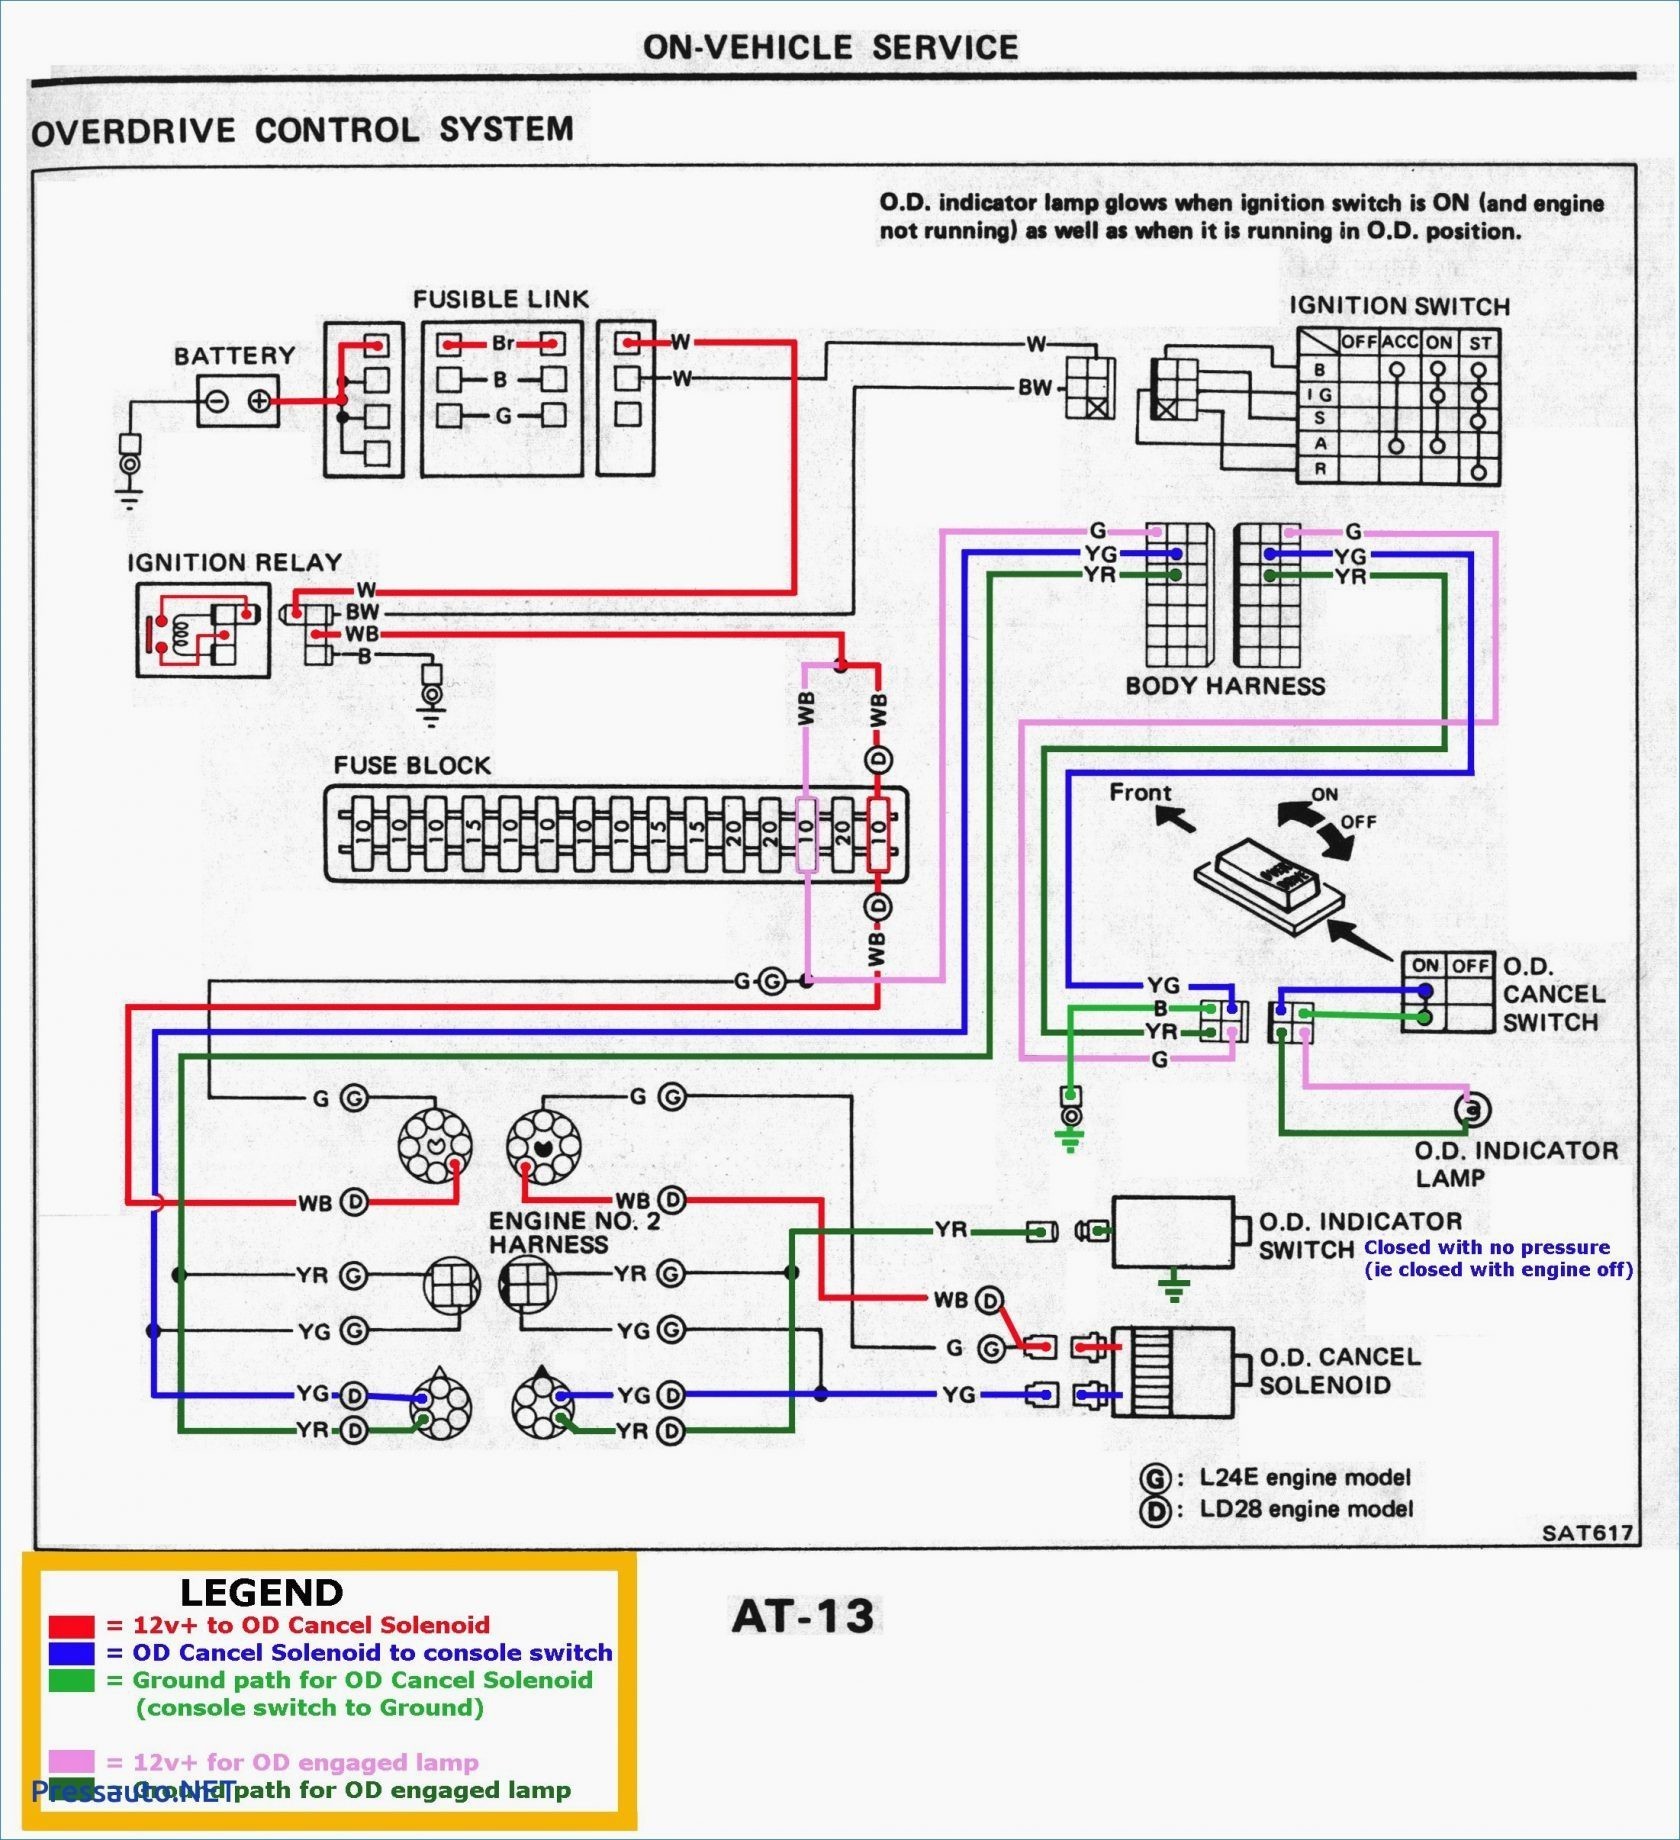 1995 toyota Camry Parts Diagram Wiring Harness for 1993 toyota Pickup Wiring Diagram Datasource Of 1995 toyota Camry Parts Diagram